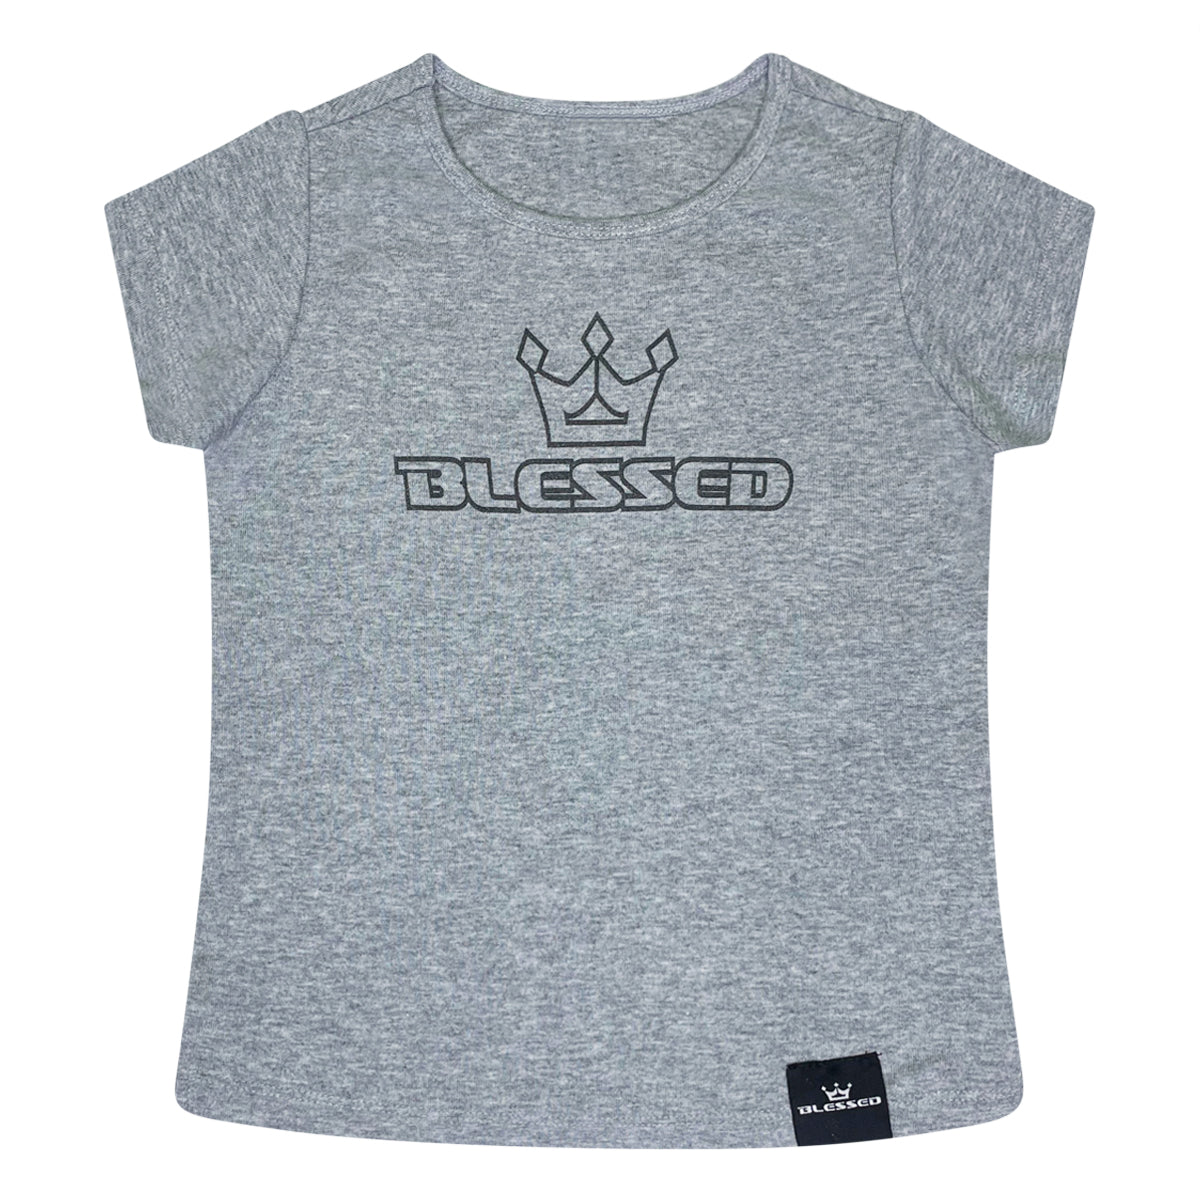 Blessed Youth Girl Tees